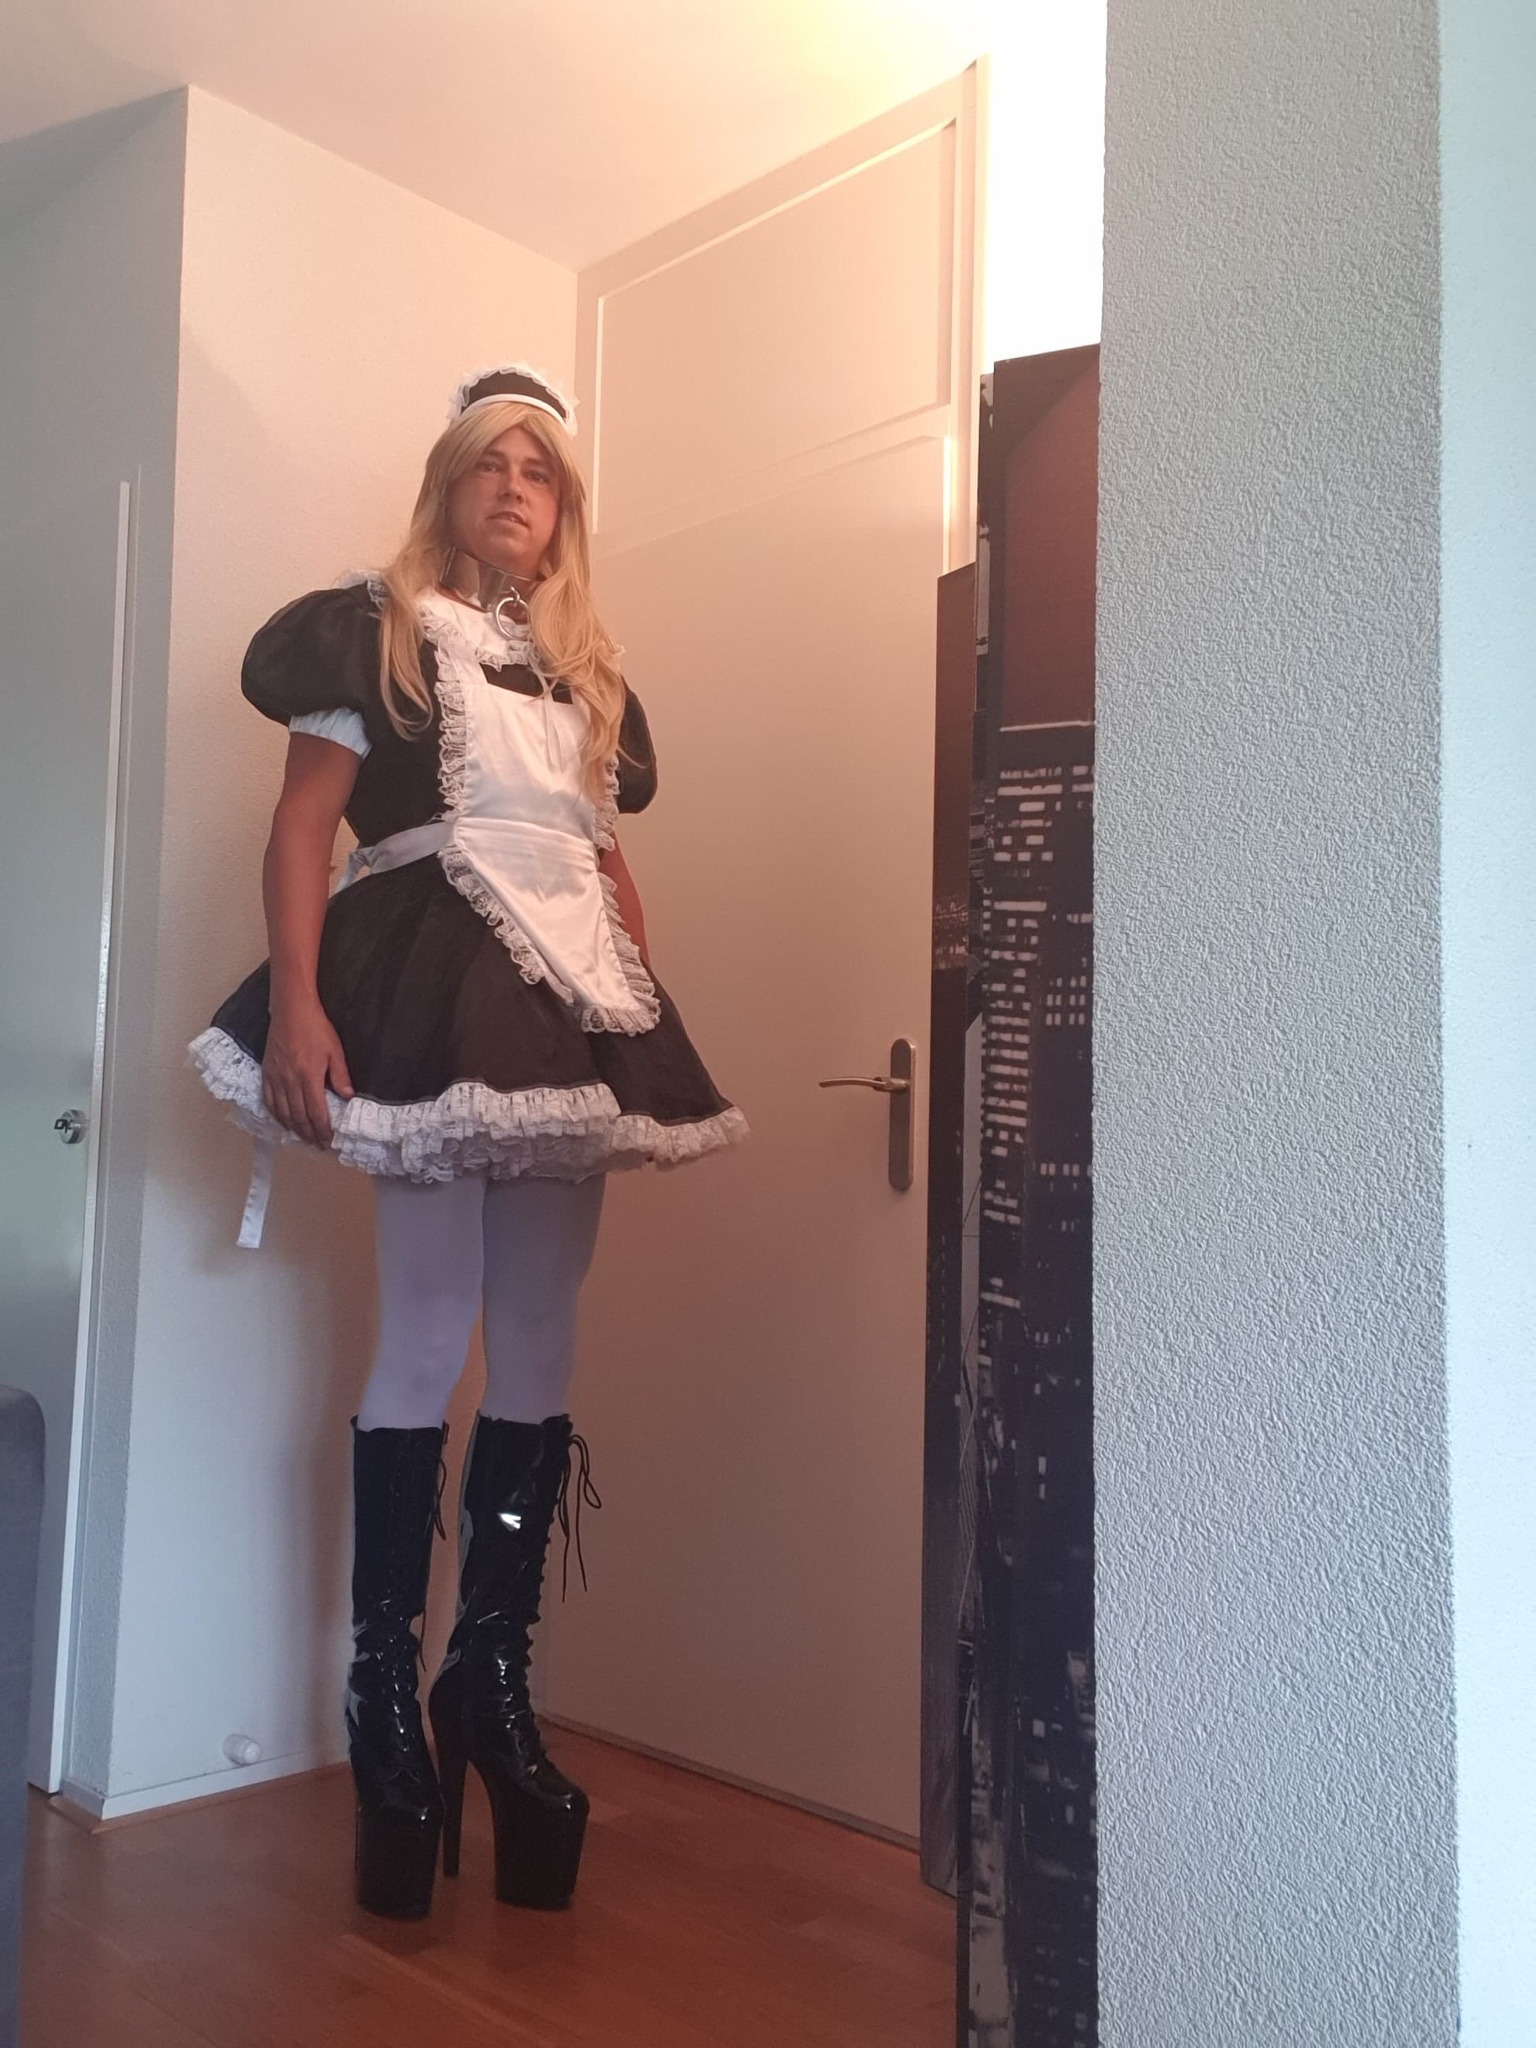 Metal maid of Maid of